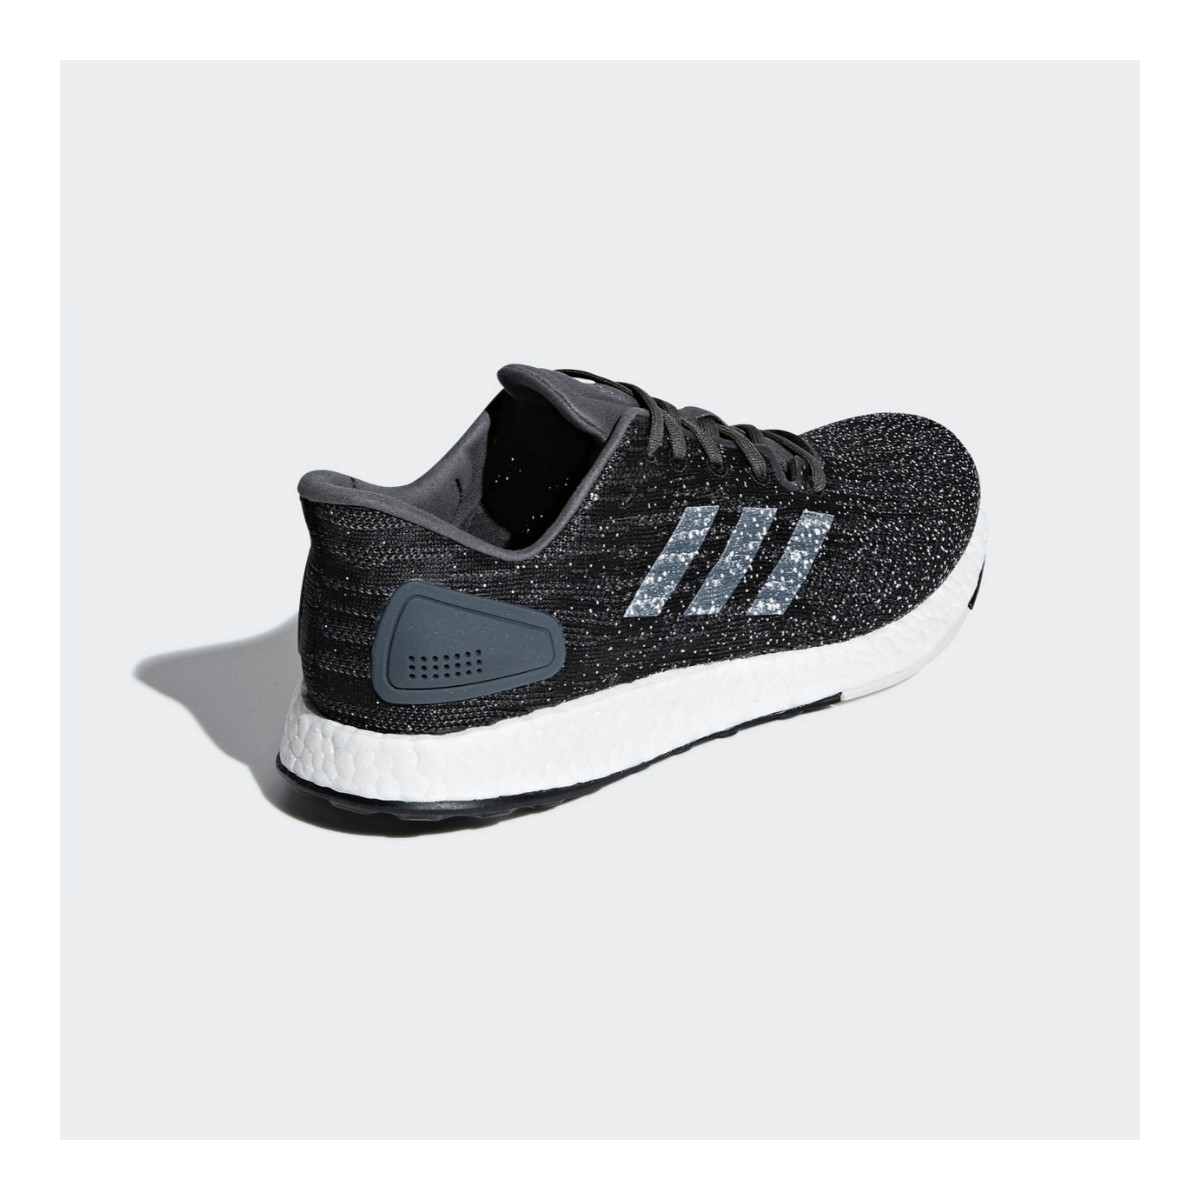 Adidas Boost 365 Rider Outlet, OFF |